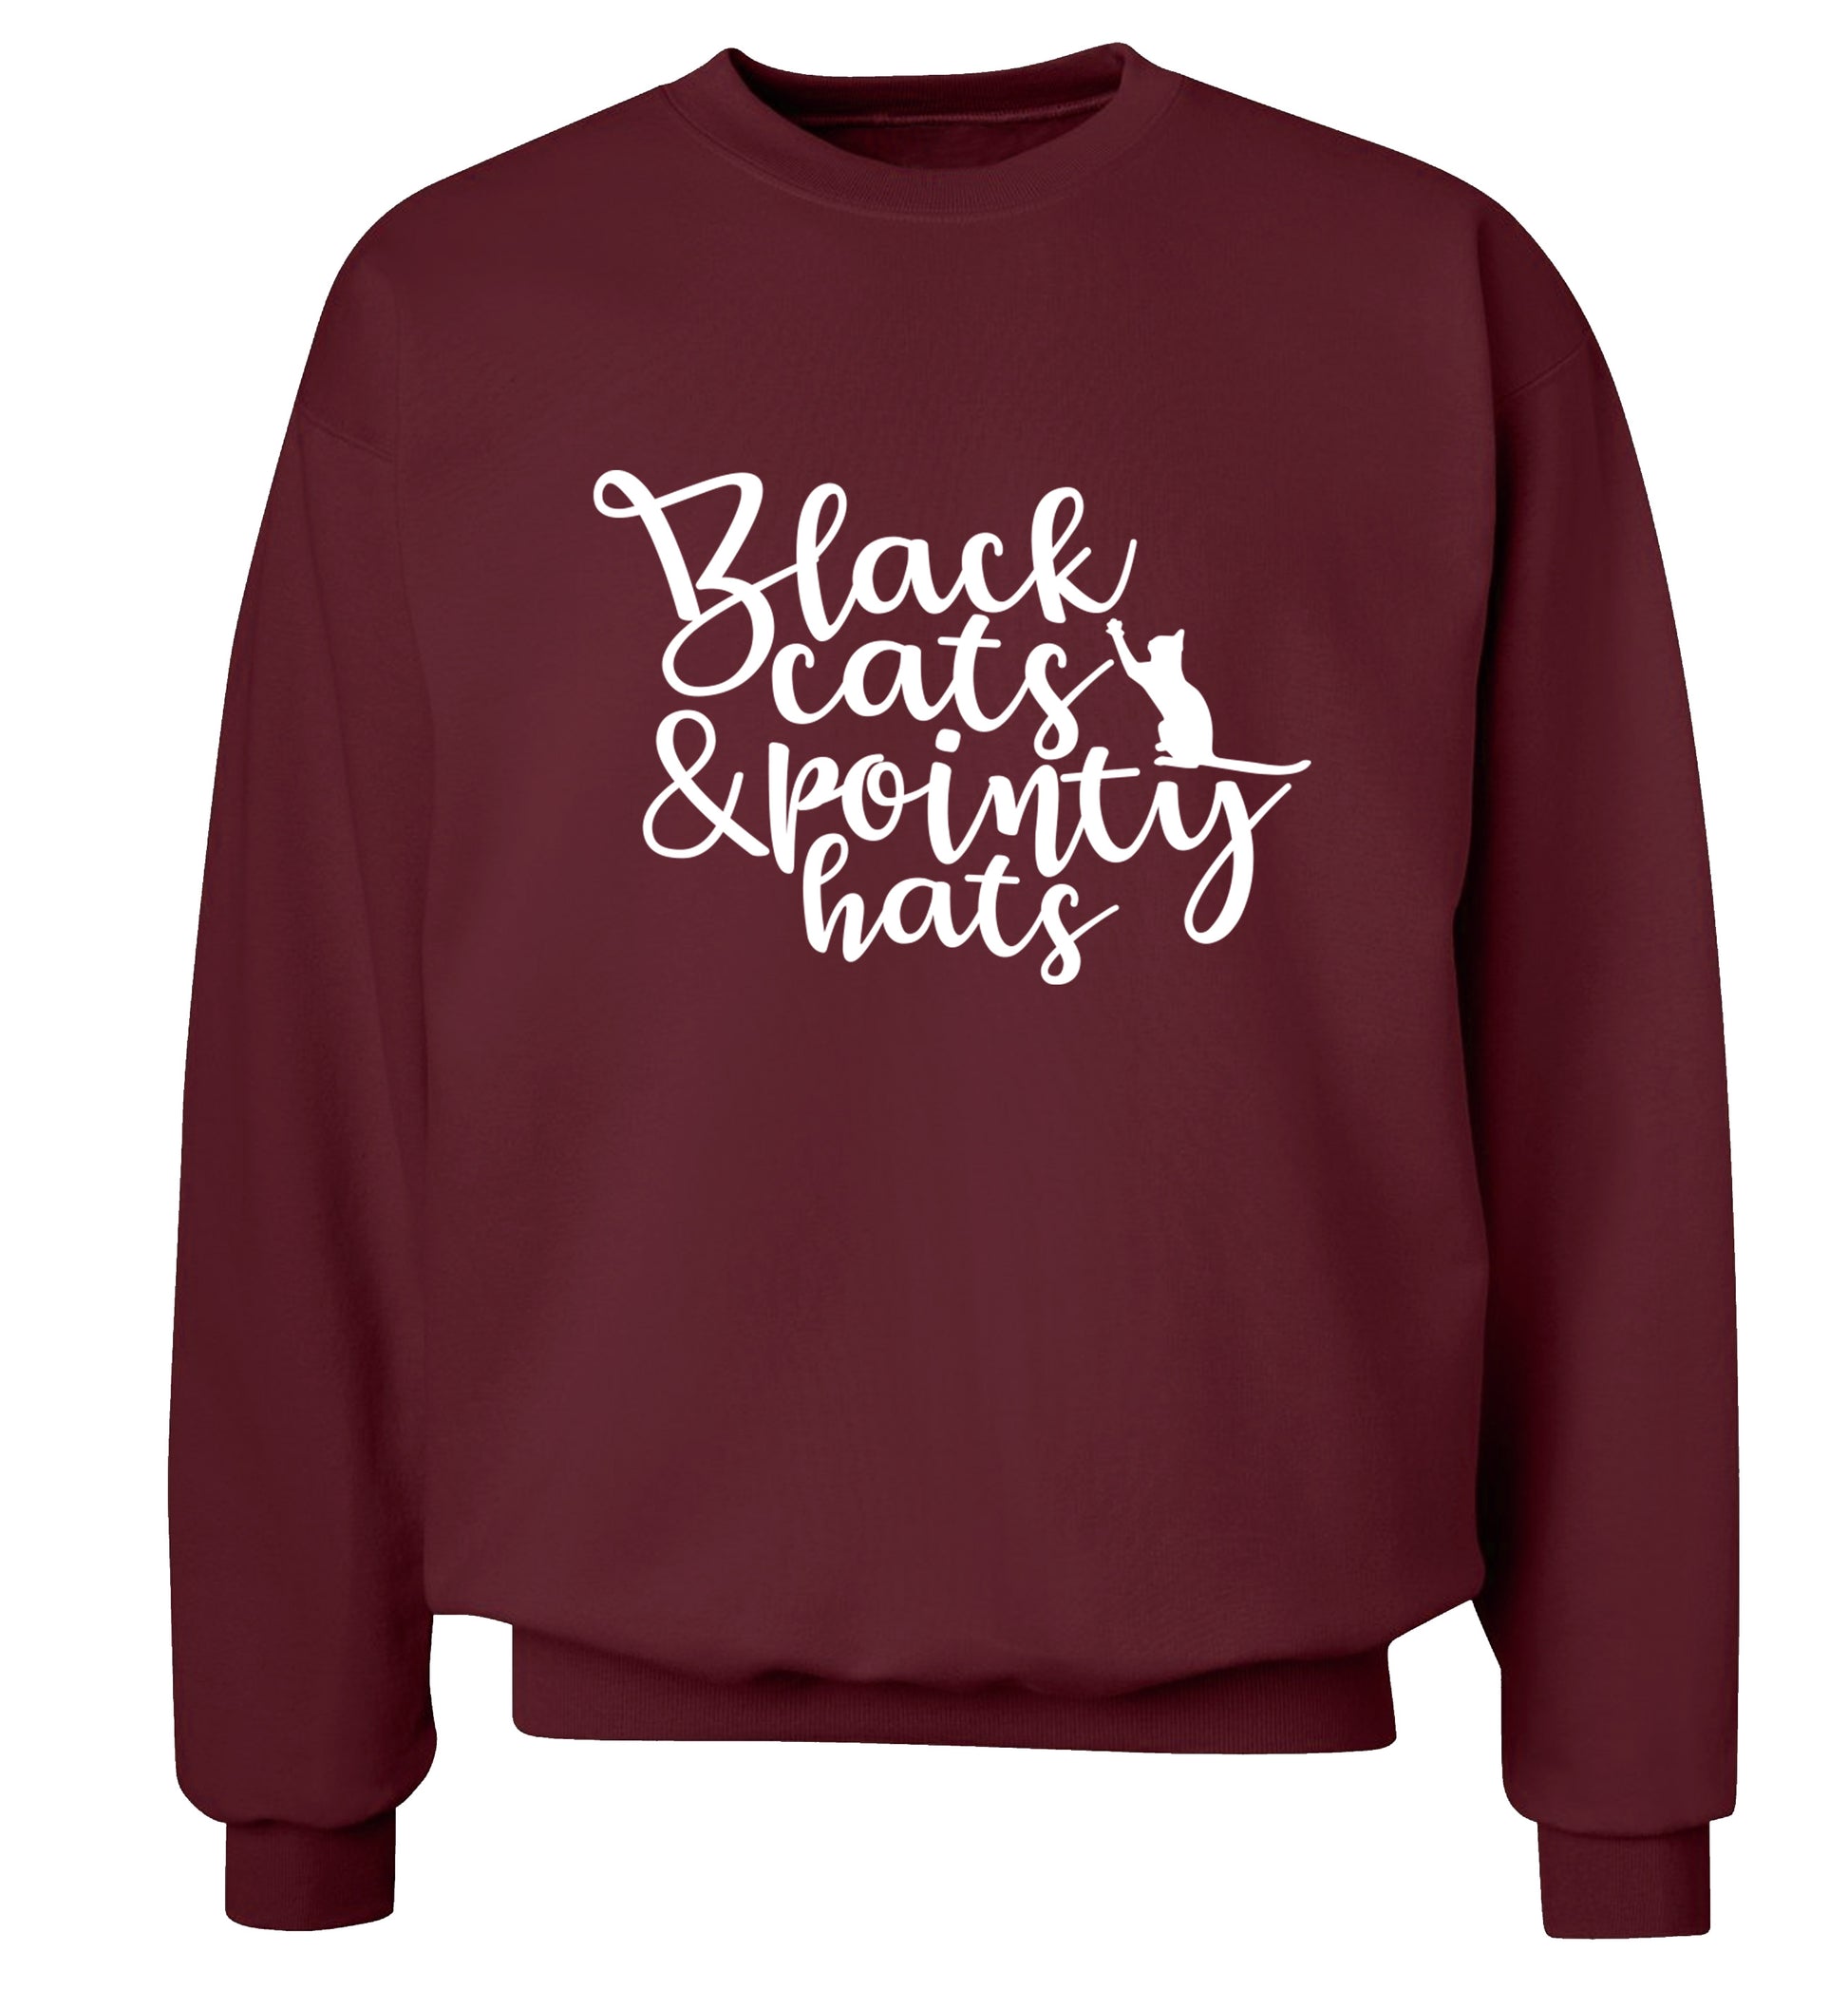 Black cats and pointy hats Adult's unisex maroon Sweater 2XL